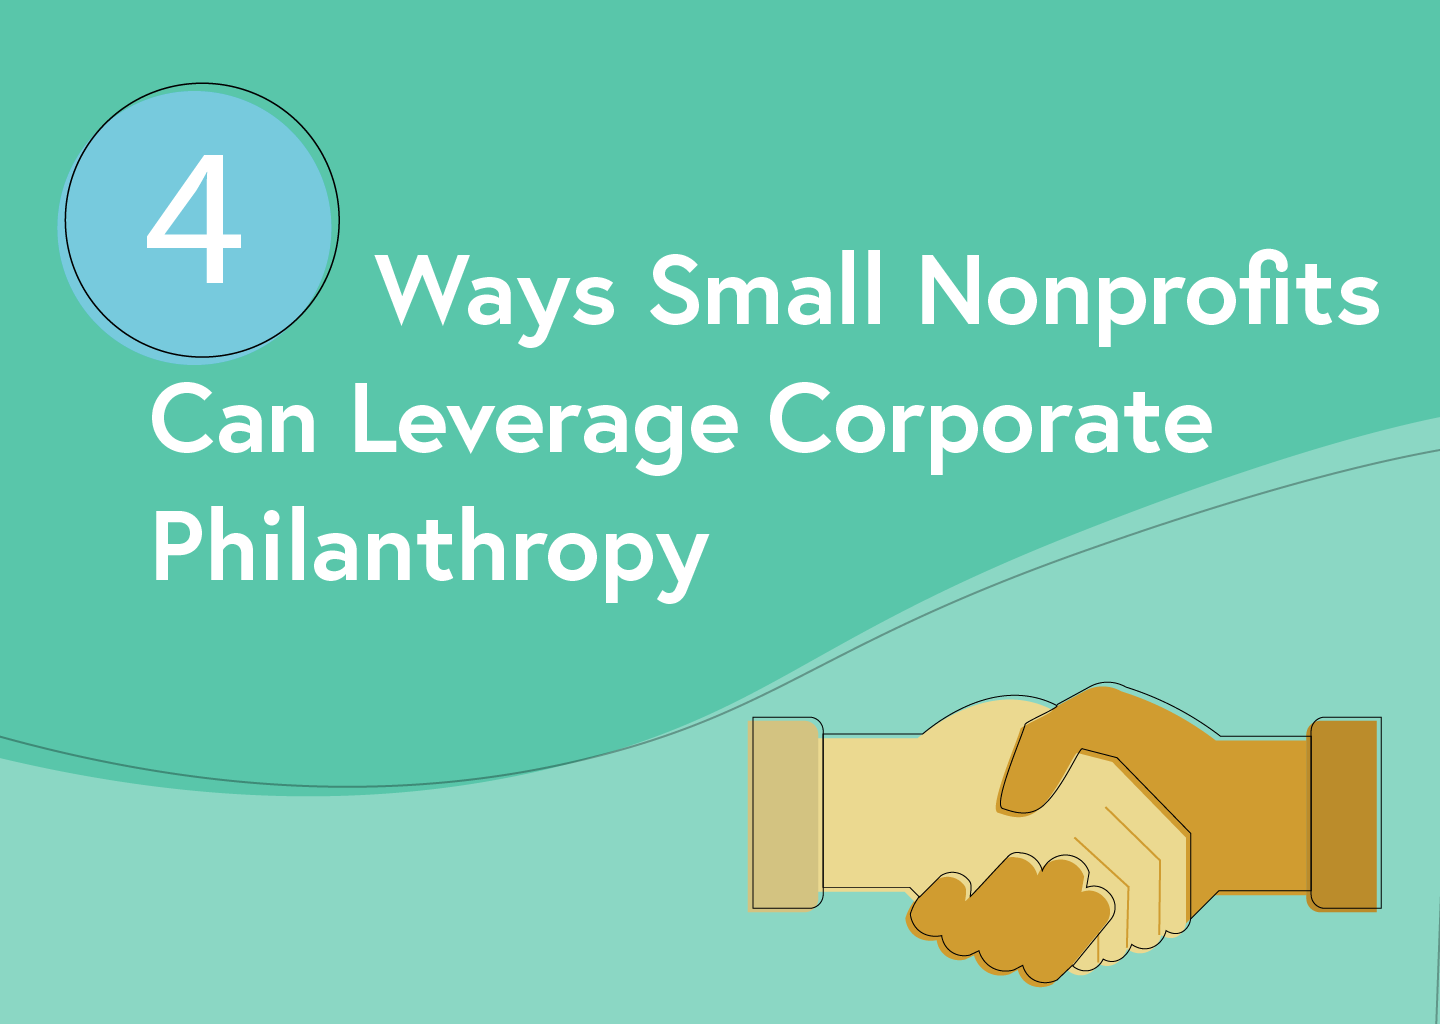 4 Ways Small Nonprofits Can Leverage Corporate Philanthropy